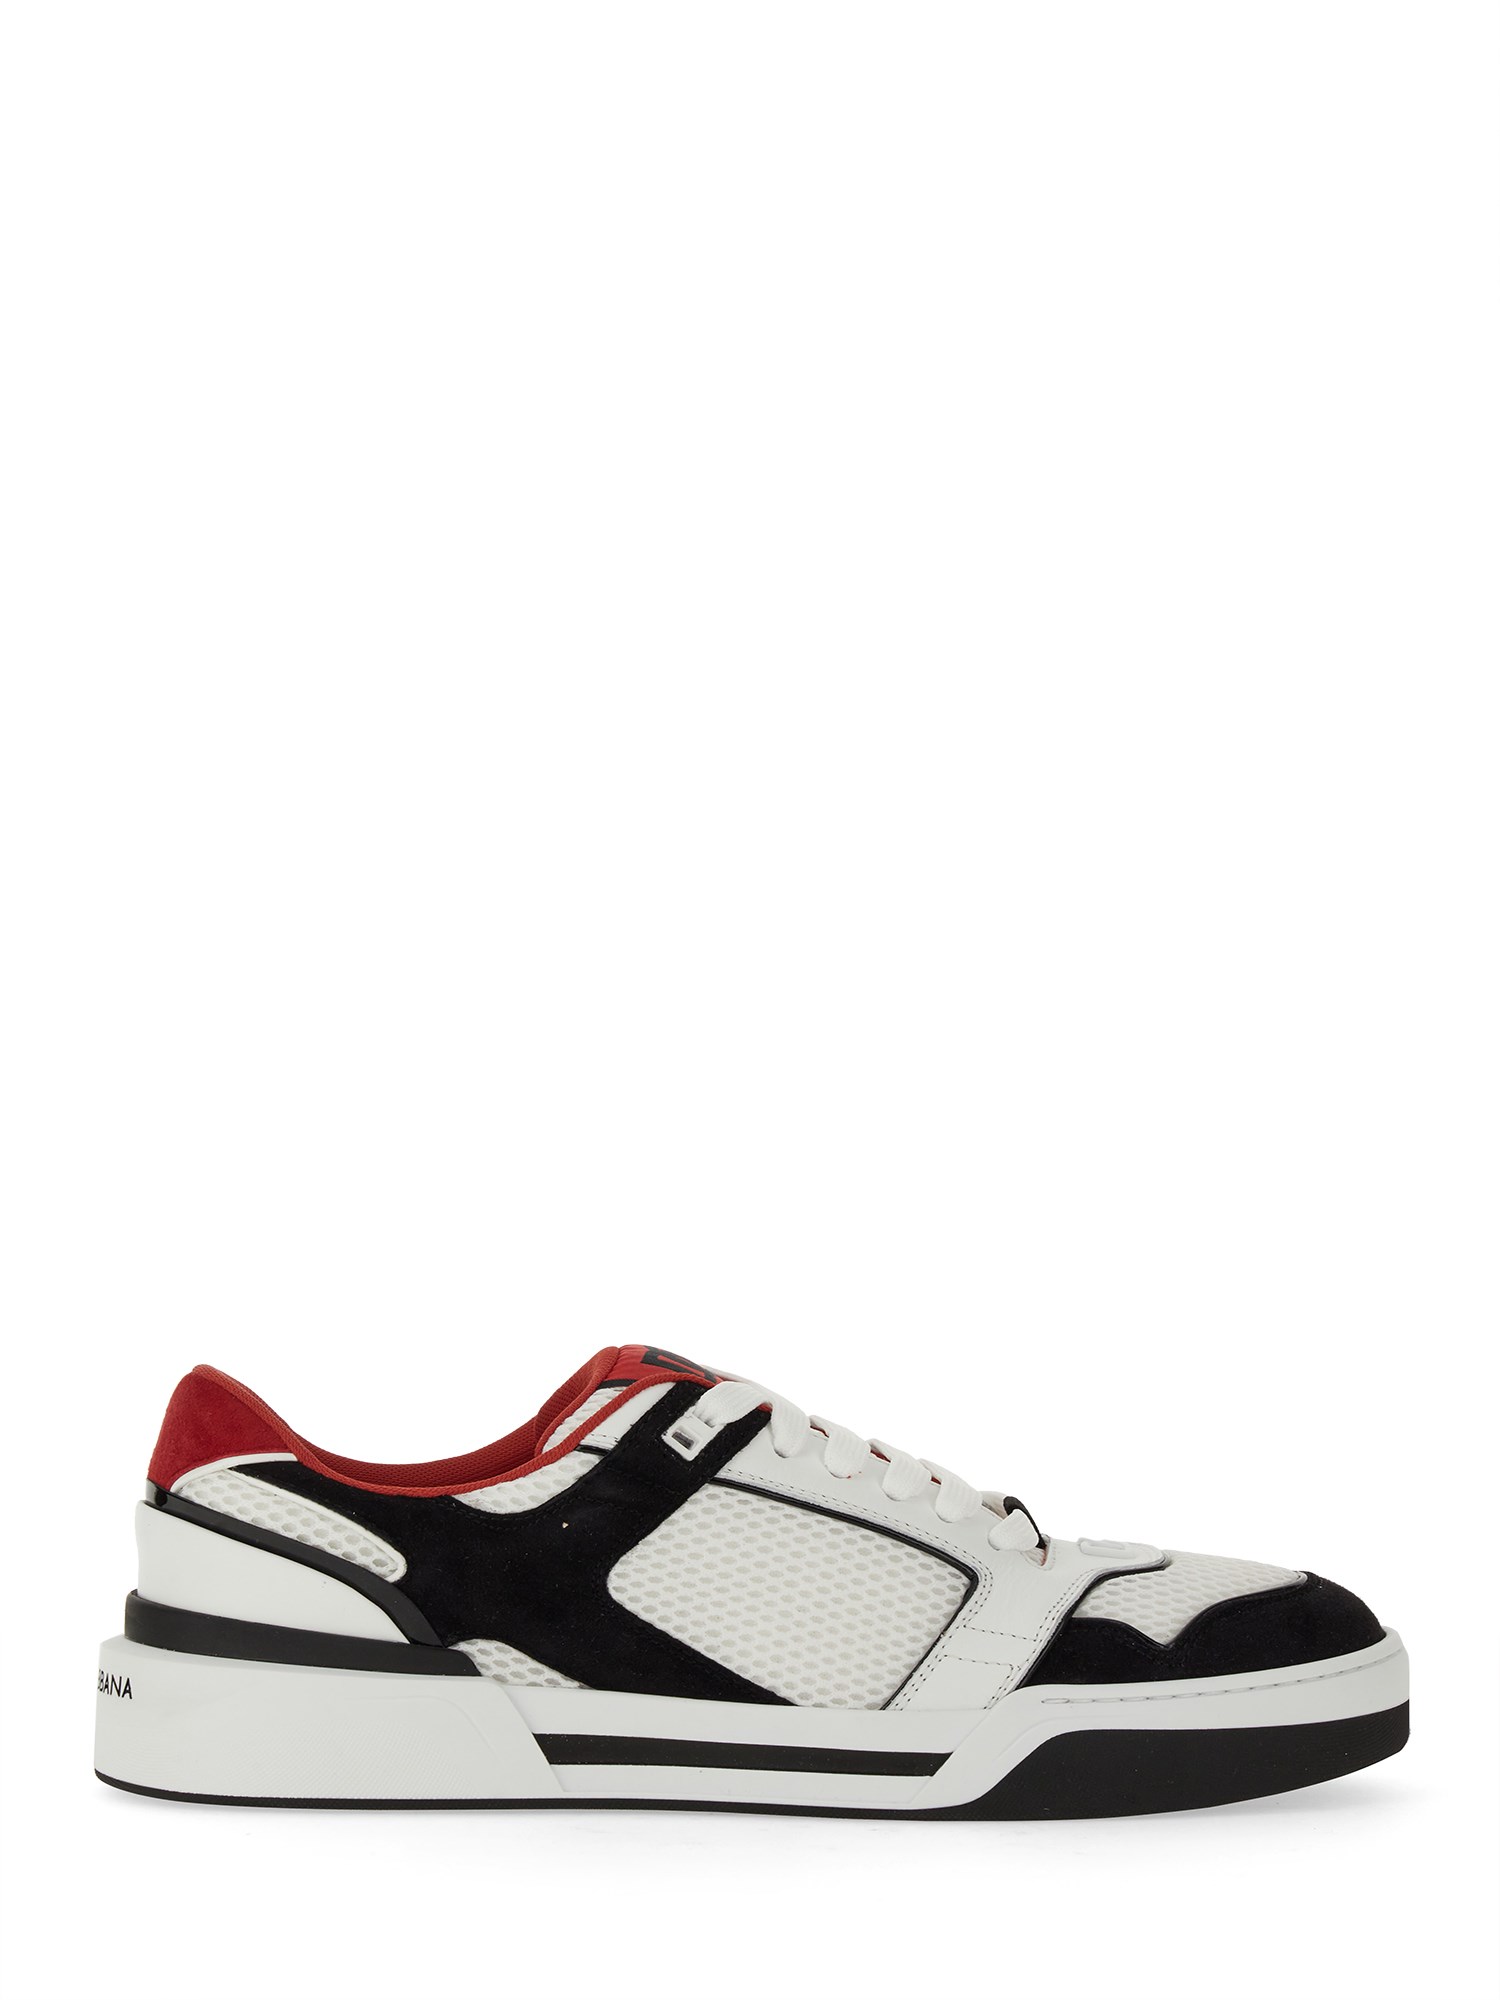 dolce & gabbana leather and mesh sneaker